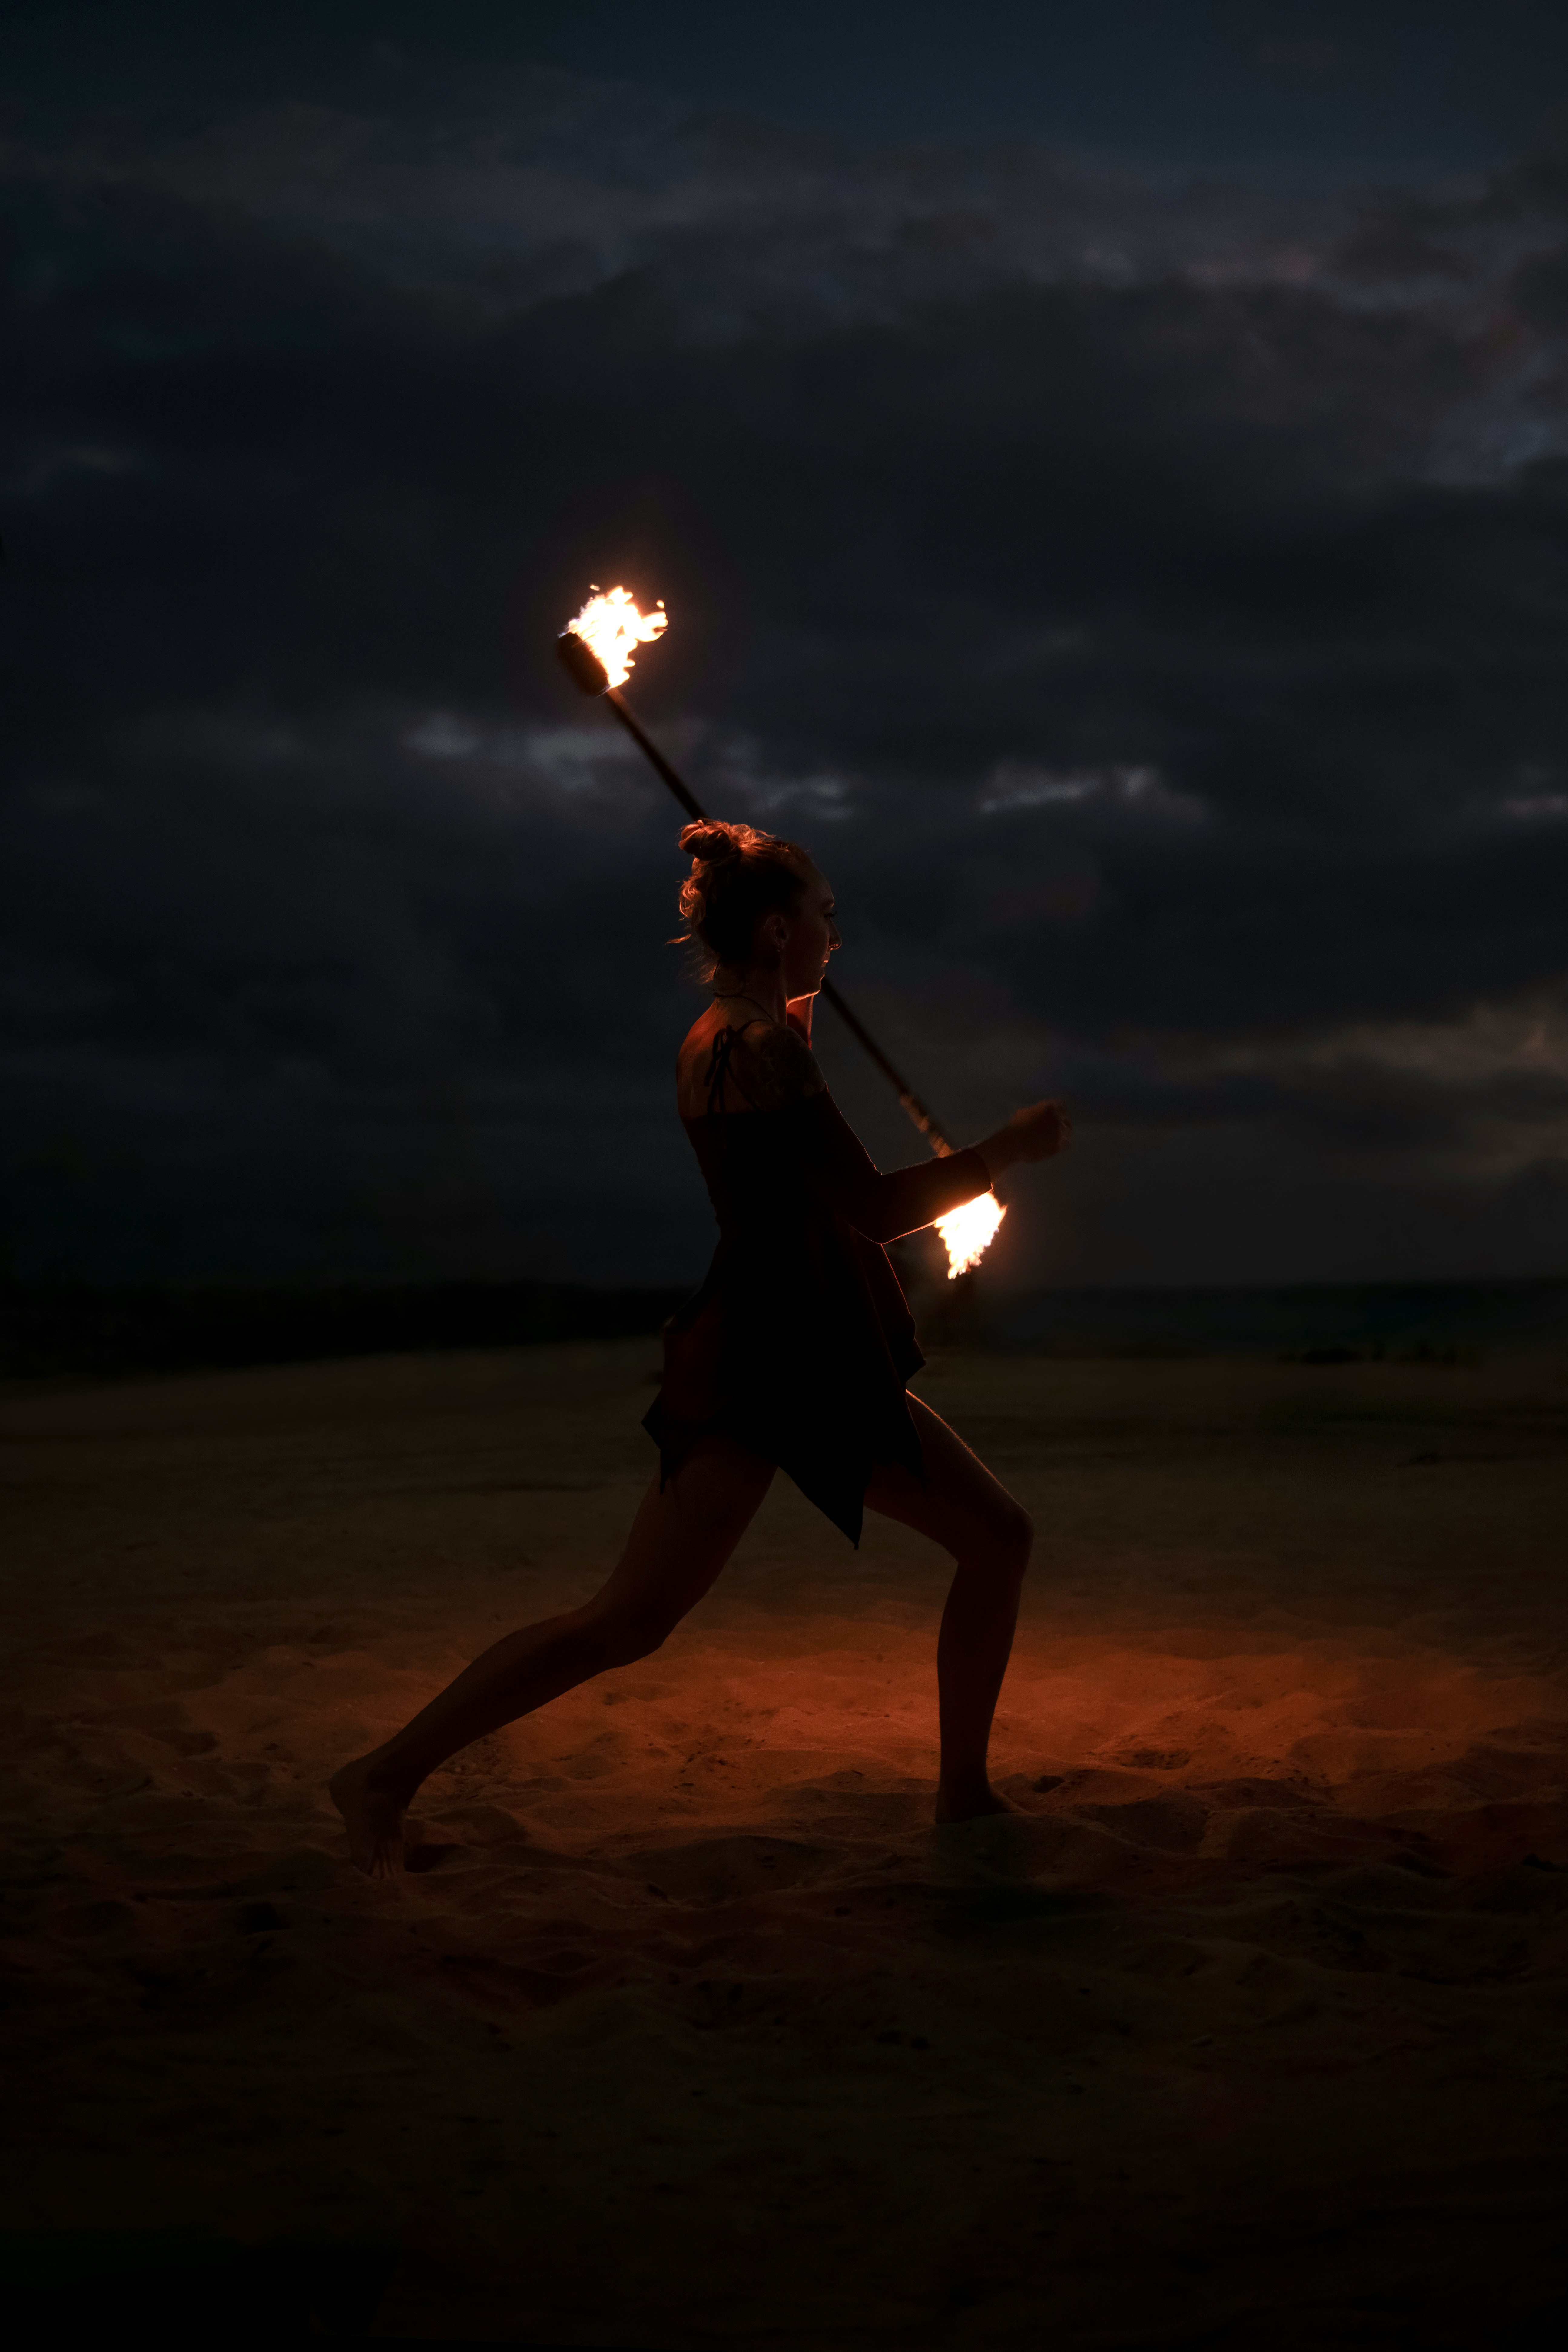 The girl with the torches, on the beach.